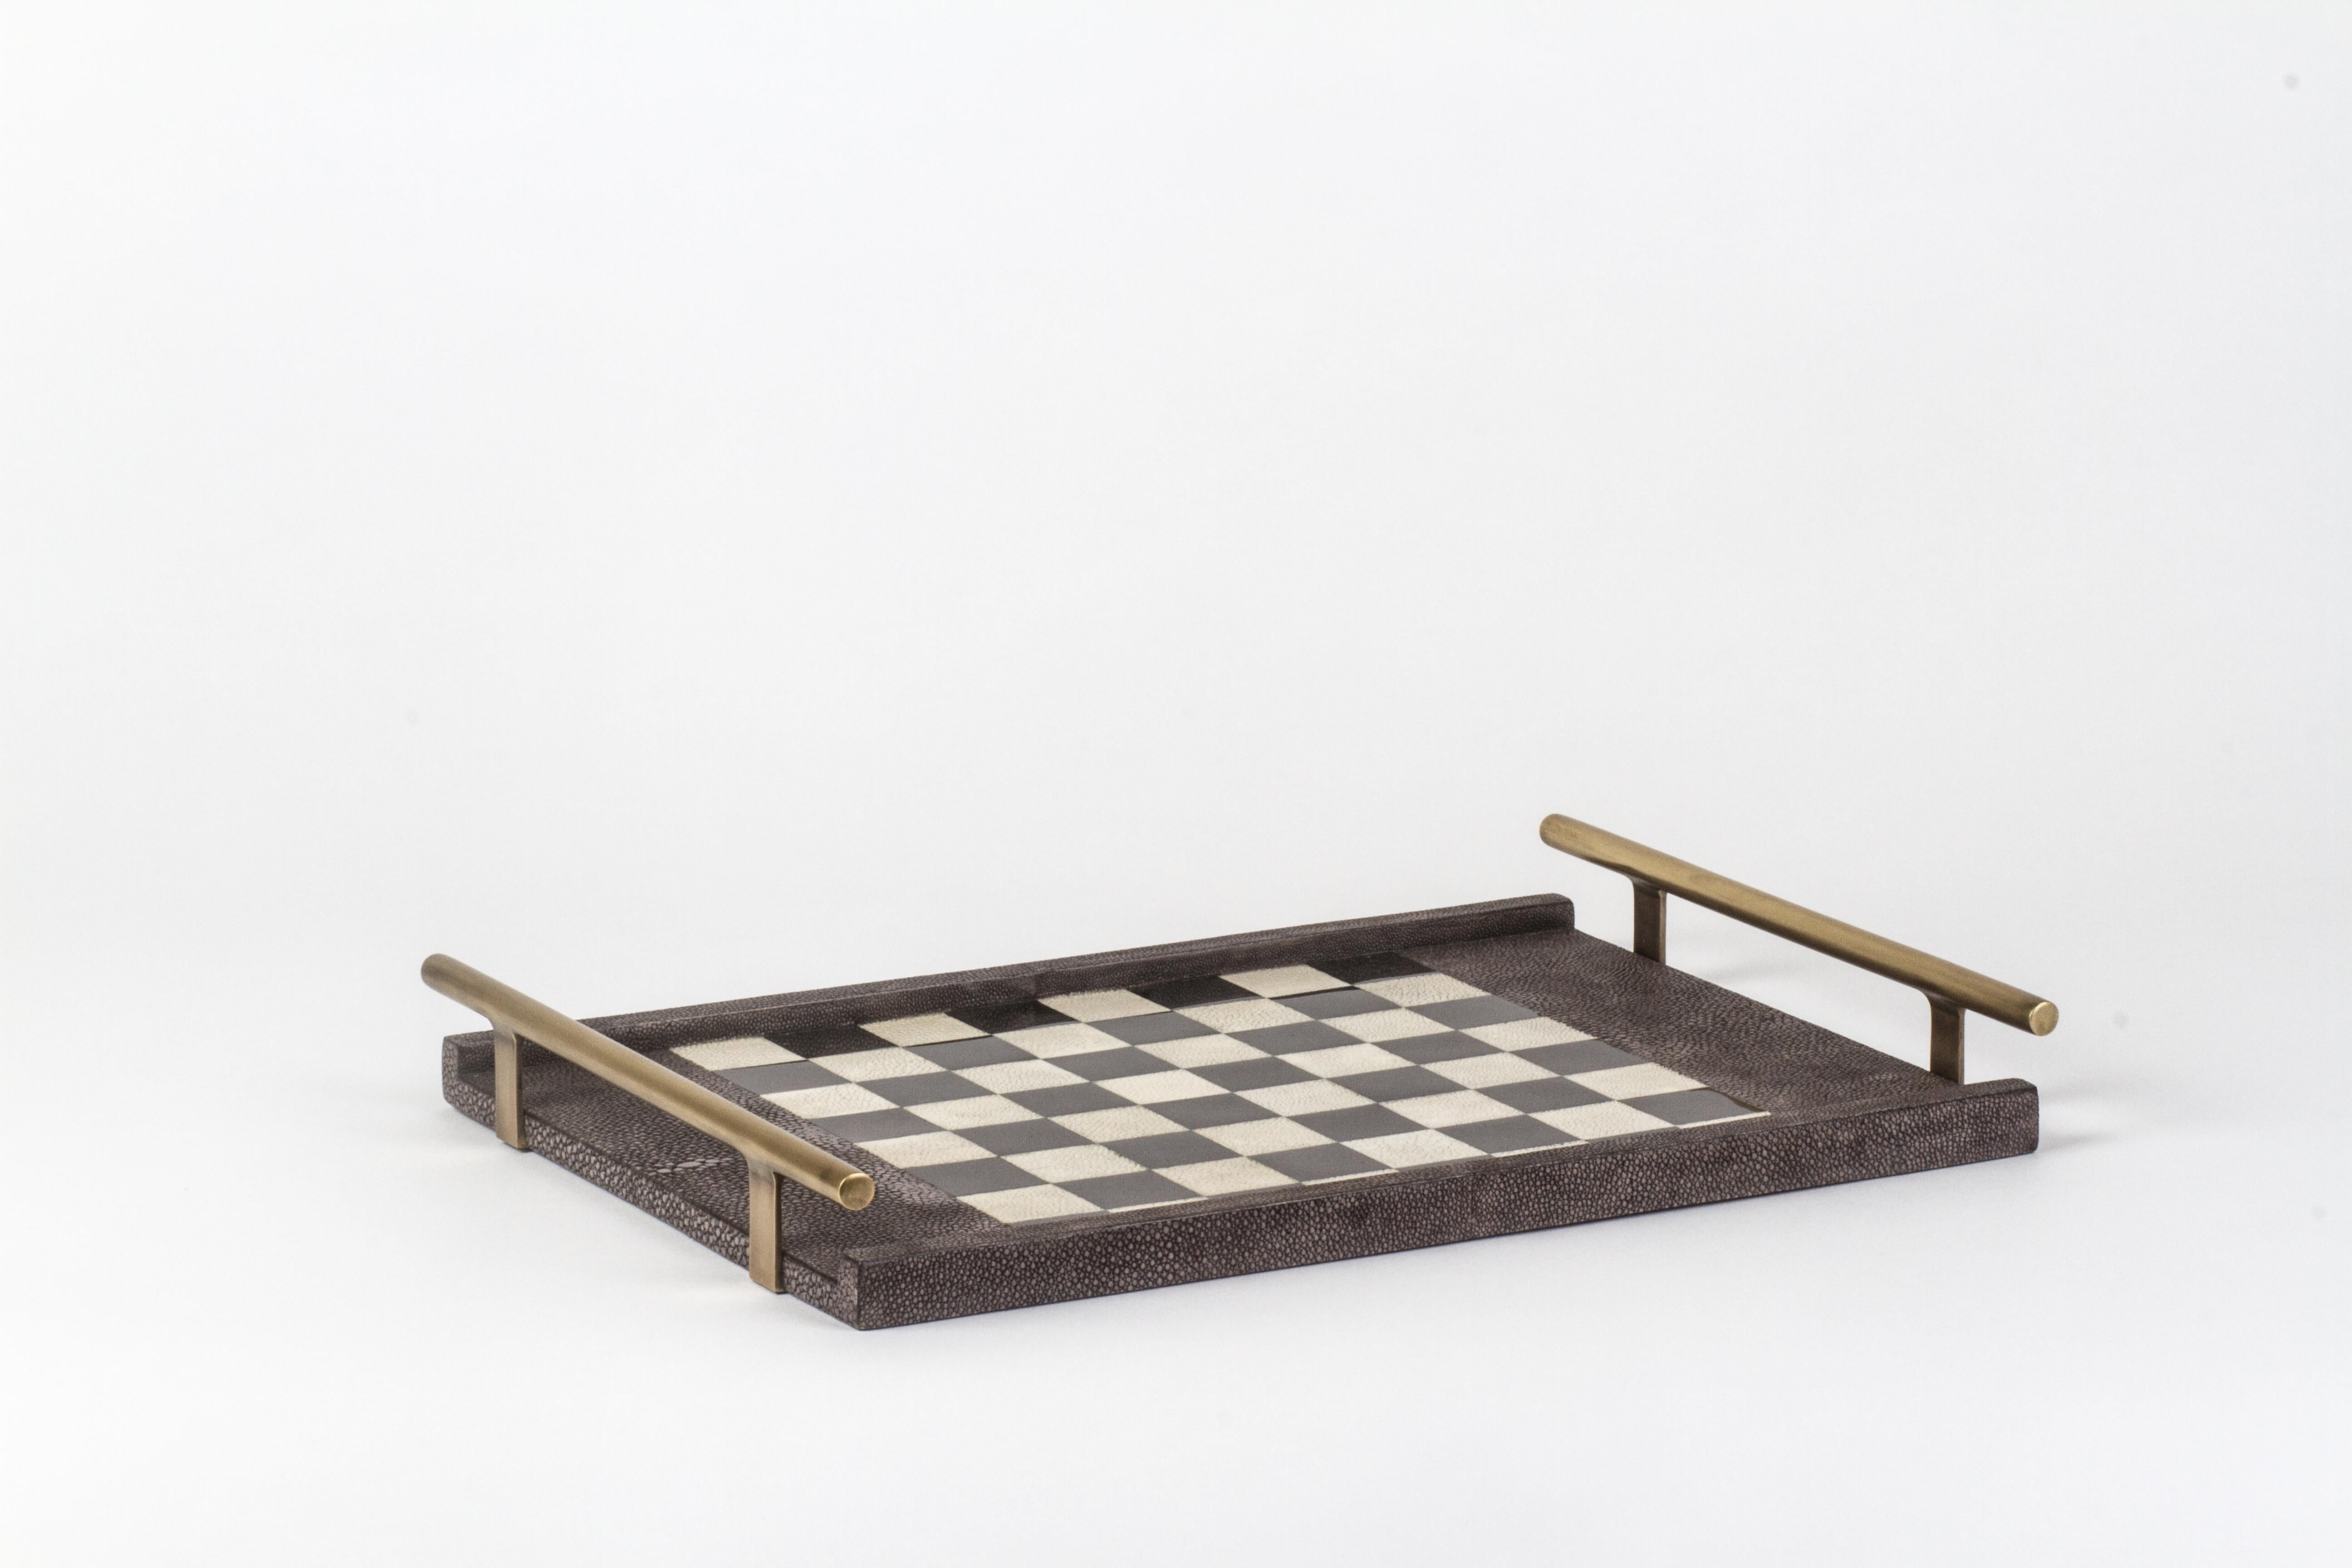 The KIFU PARIS chess game tray is the ultimate luxury game. Accented with a mixture of shagreen, pen shell and bronze-patina brass this piece comes with all game parts in a velvet pouch. Available in a light or dark color-way.

The dimensions of